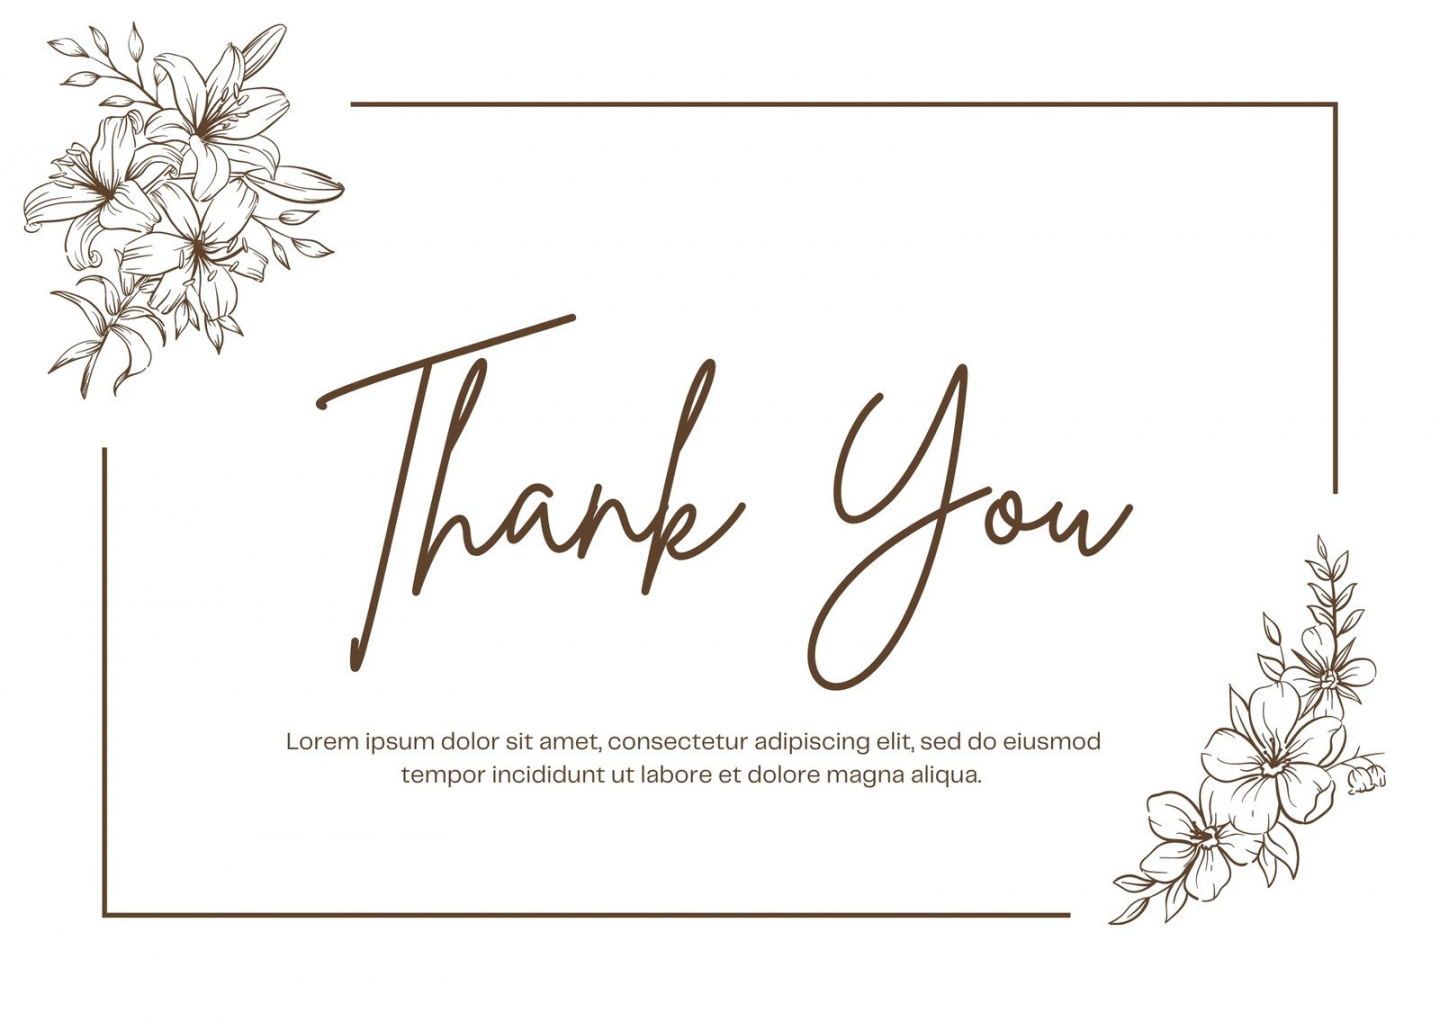 Printable, customizable thank you card templates  Canva - FREE Printables - Free Printable Thank You Cards Black And White